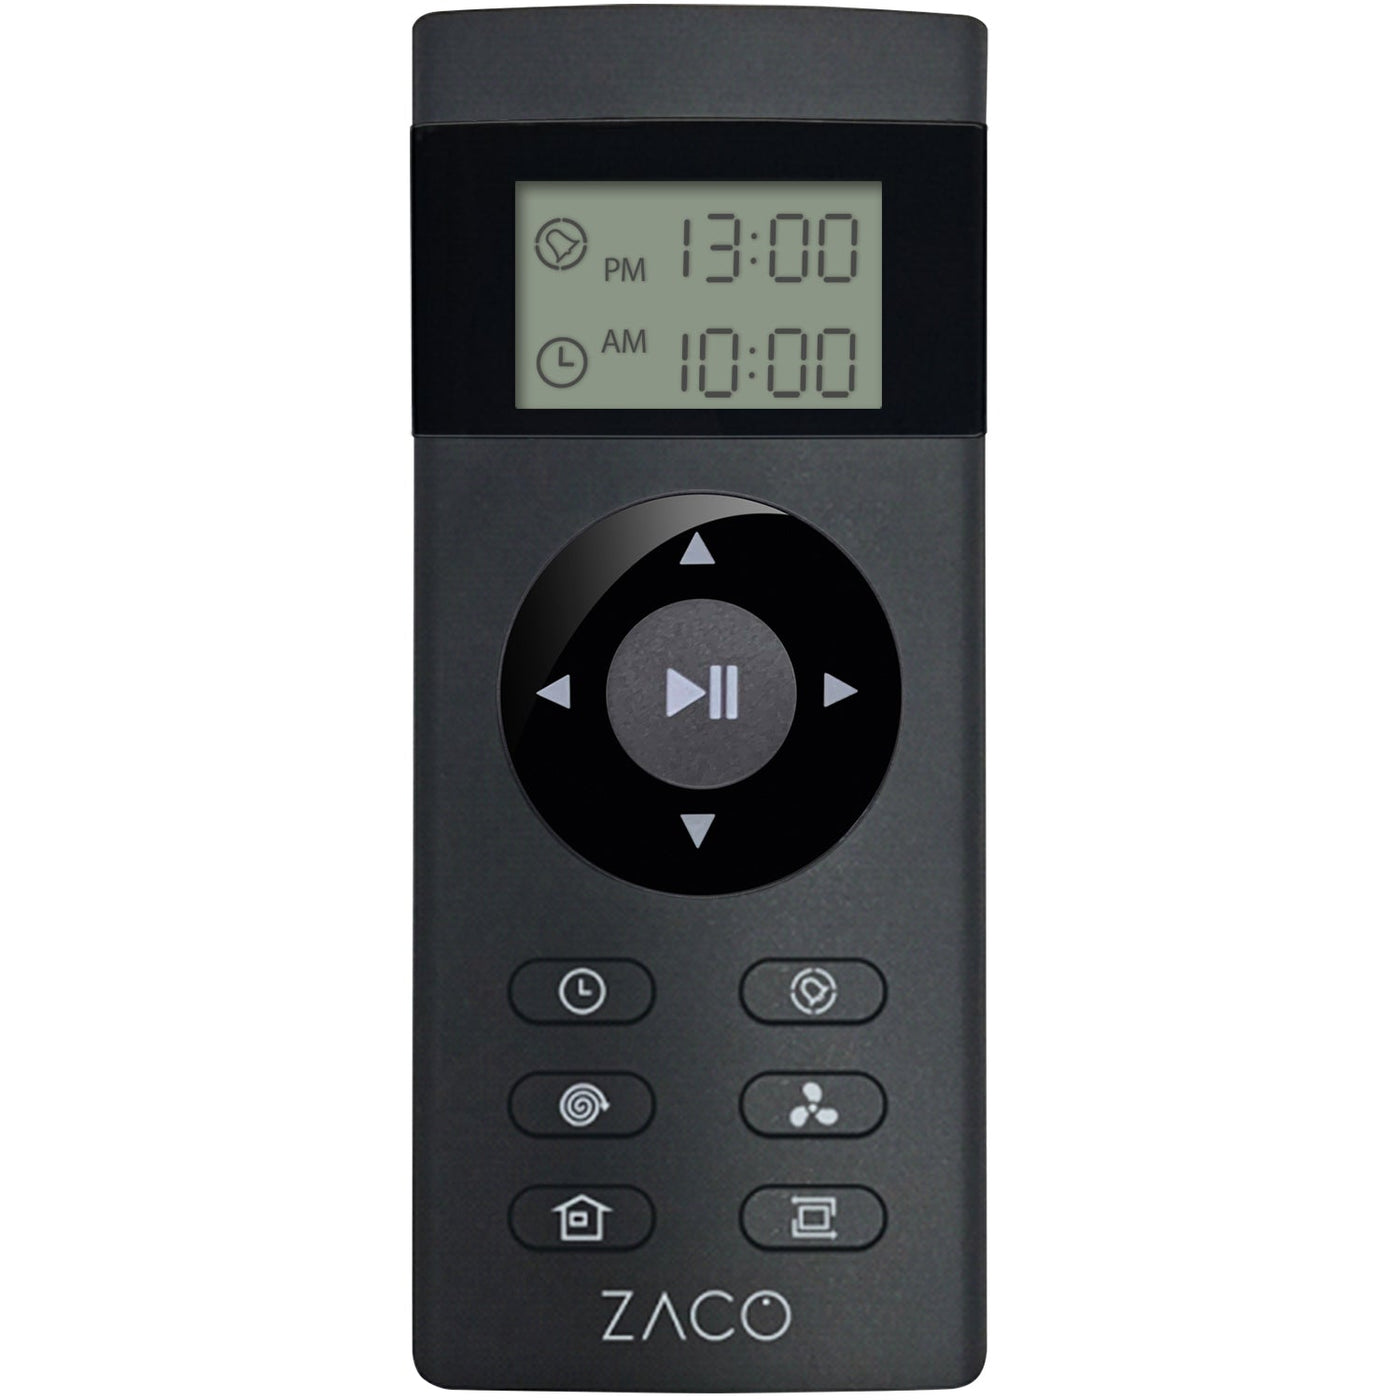 Replacement ZACO remote control for V5x, V6, A8s, A9s, A9sPro and A10